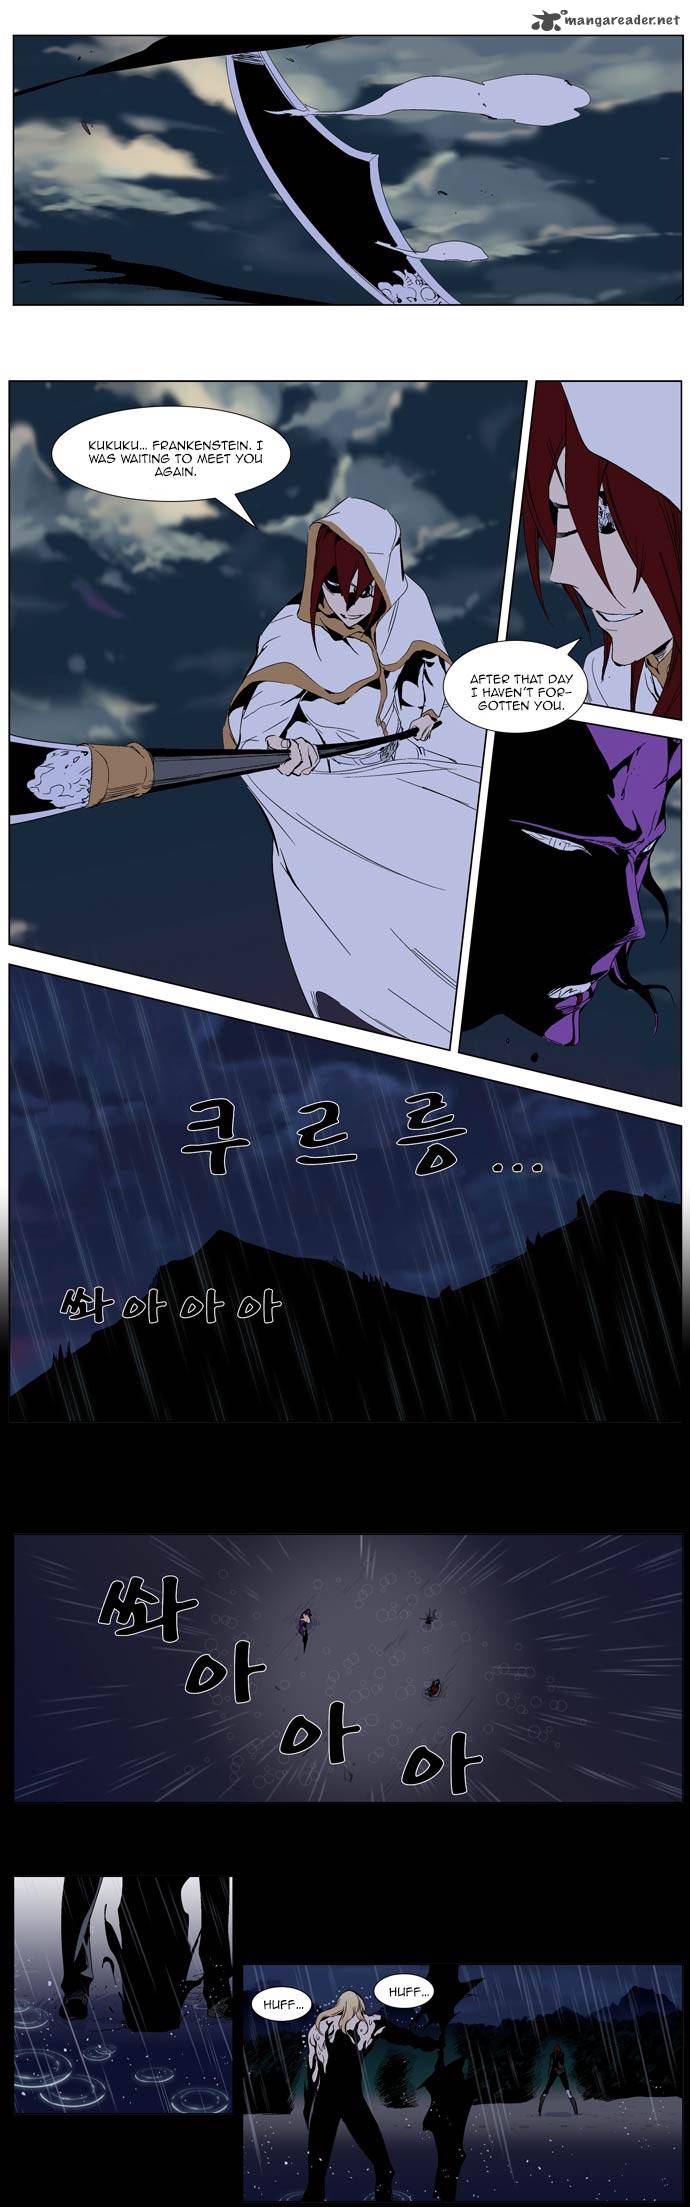 Noblesse 276 7